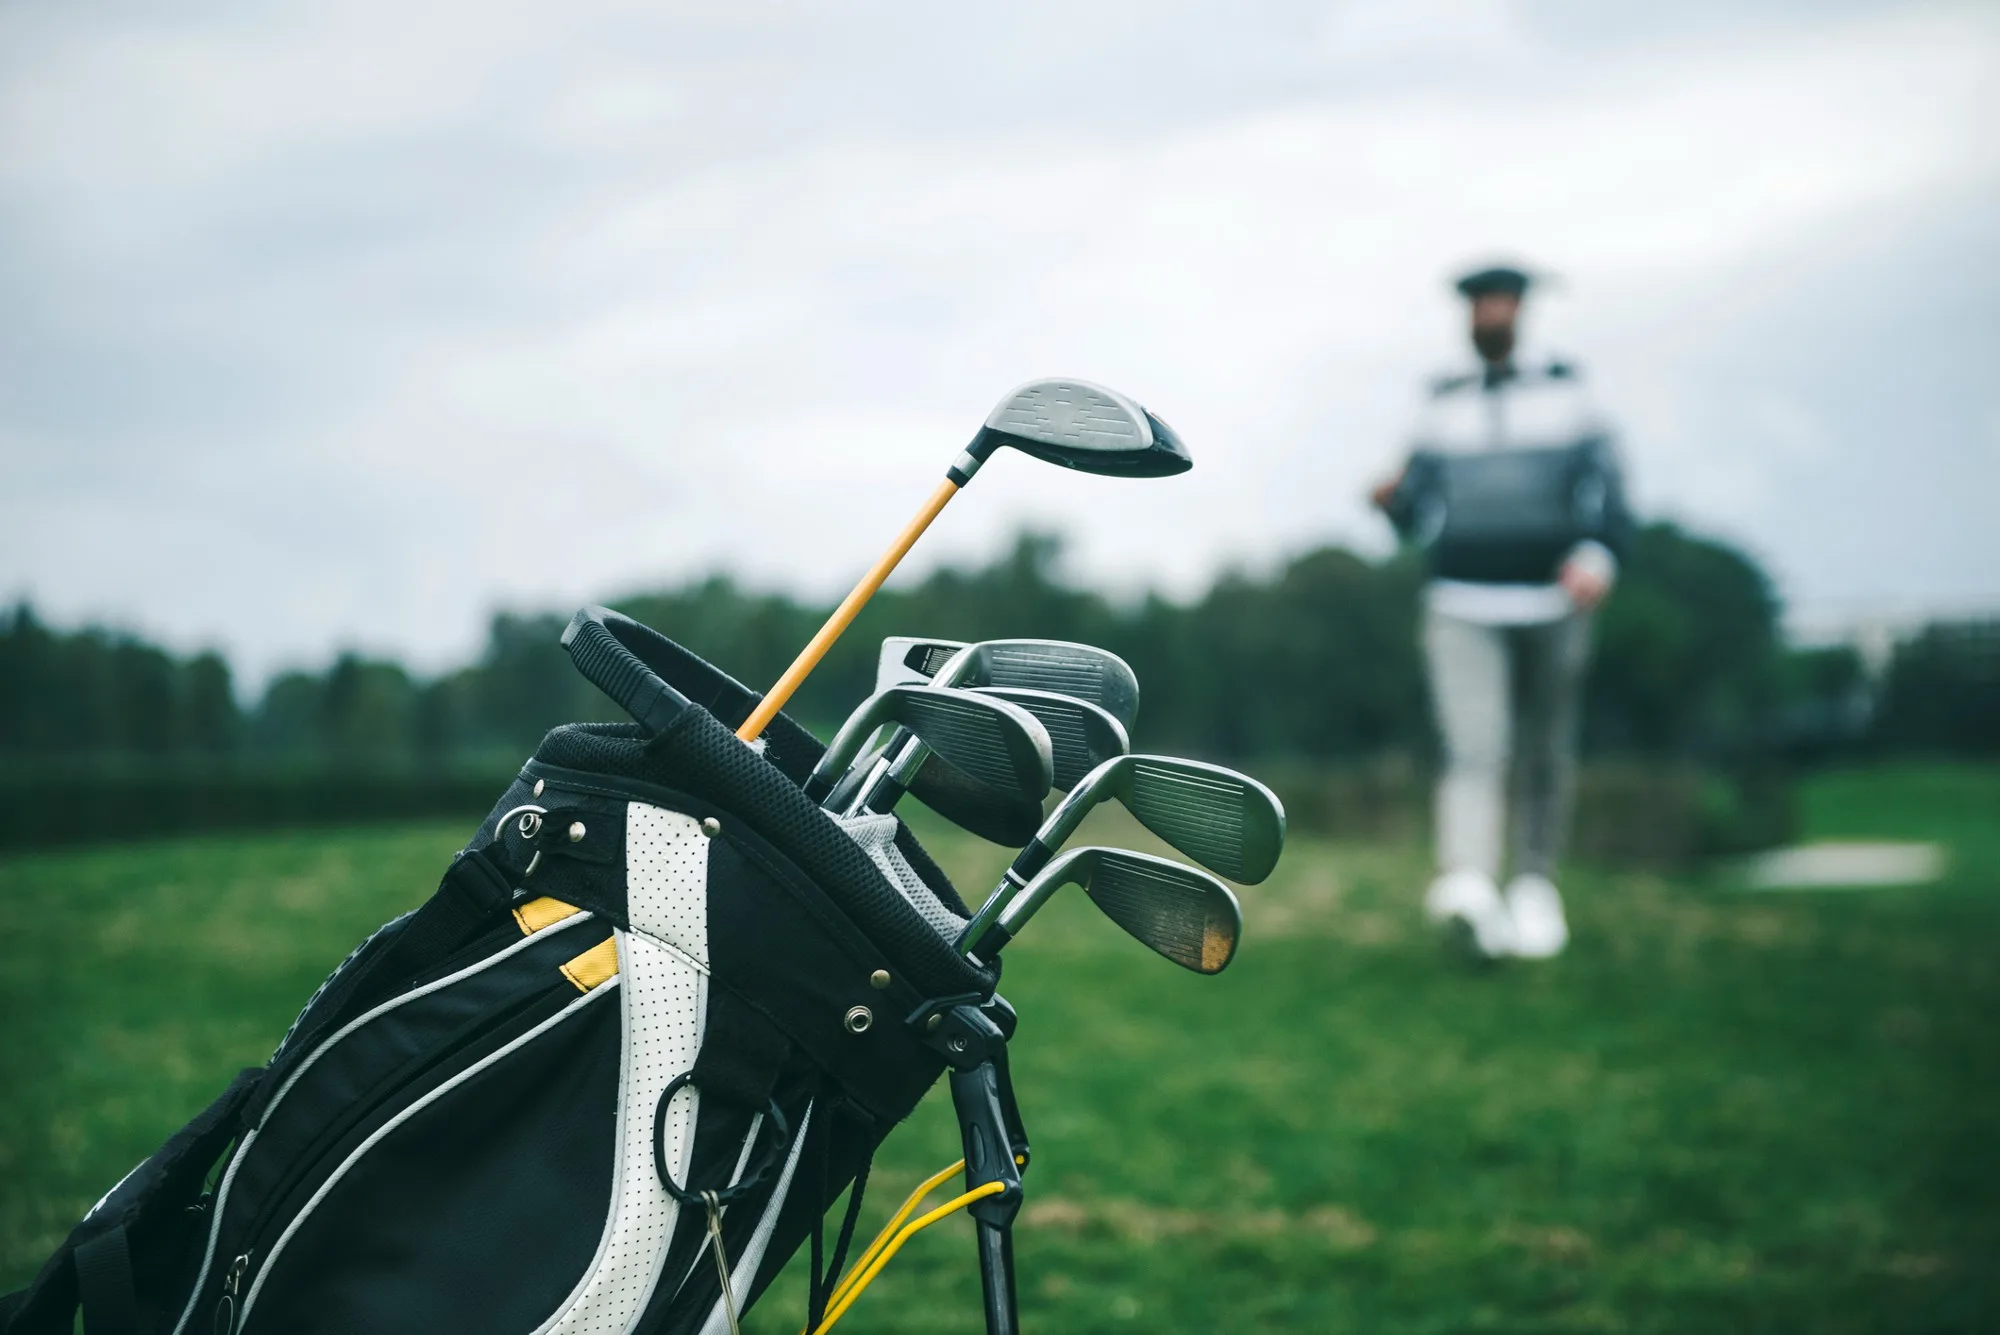 Buying Guides: Best lightweight golf bags